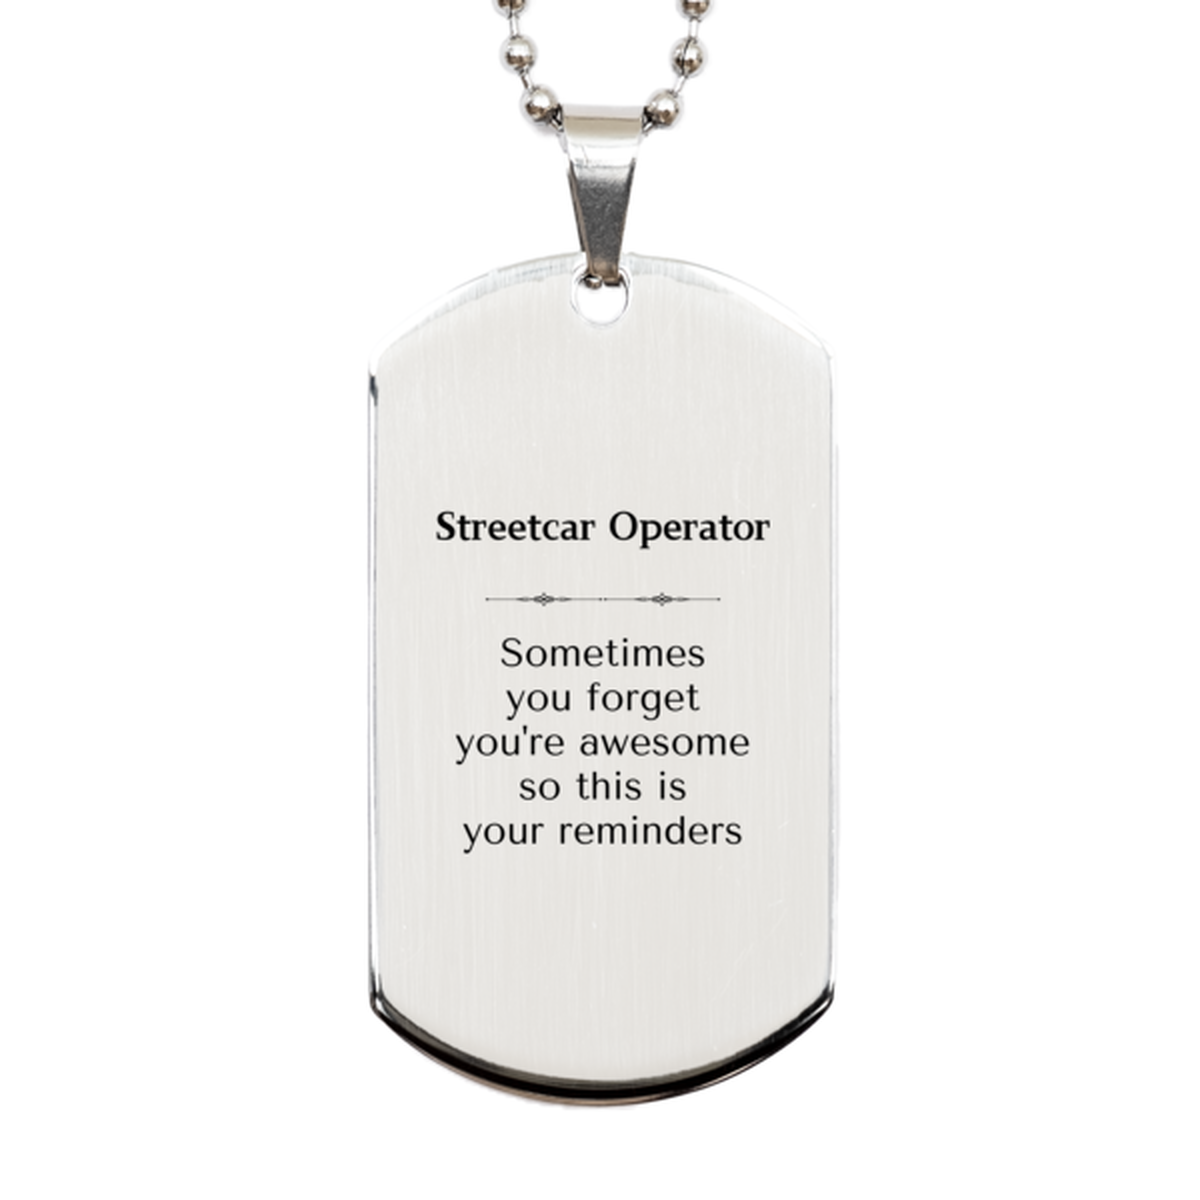 Sentimental Streetcar Operator Silver Dog Tag, Streetcar Operator Sometimes you forget you're awesome so this is your reminders, Graduation Christmas Birthday Gifts for Streetcar Operator, Men, Women, Coworkers